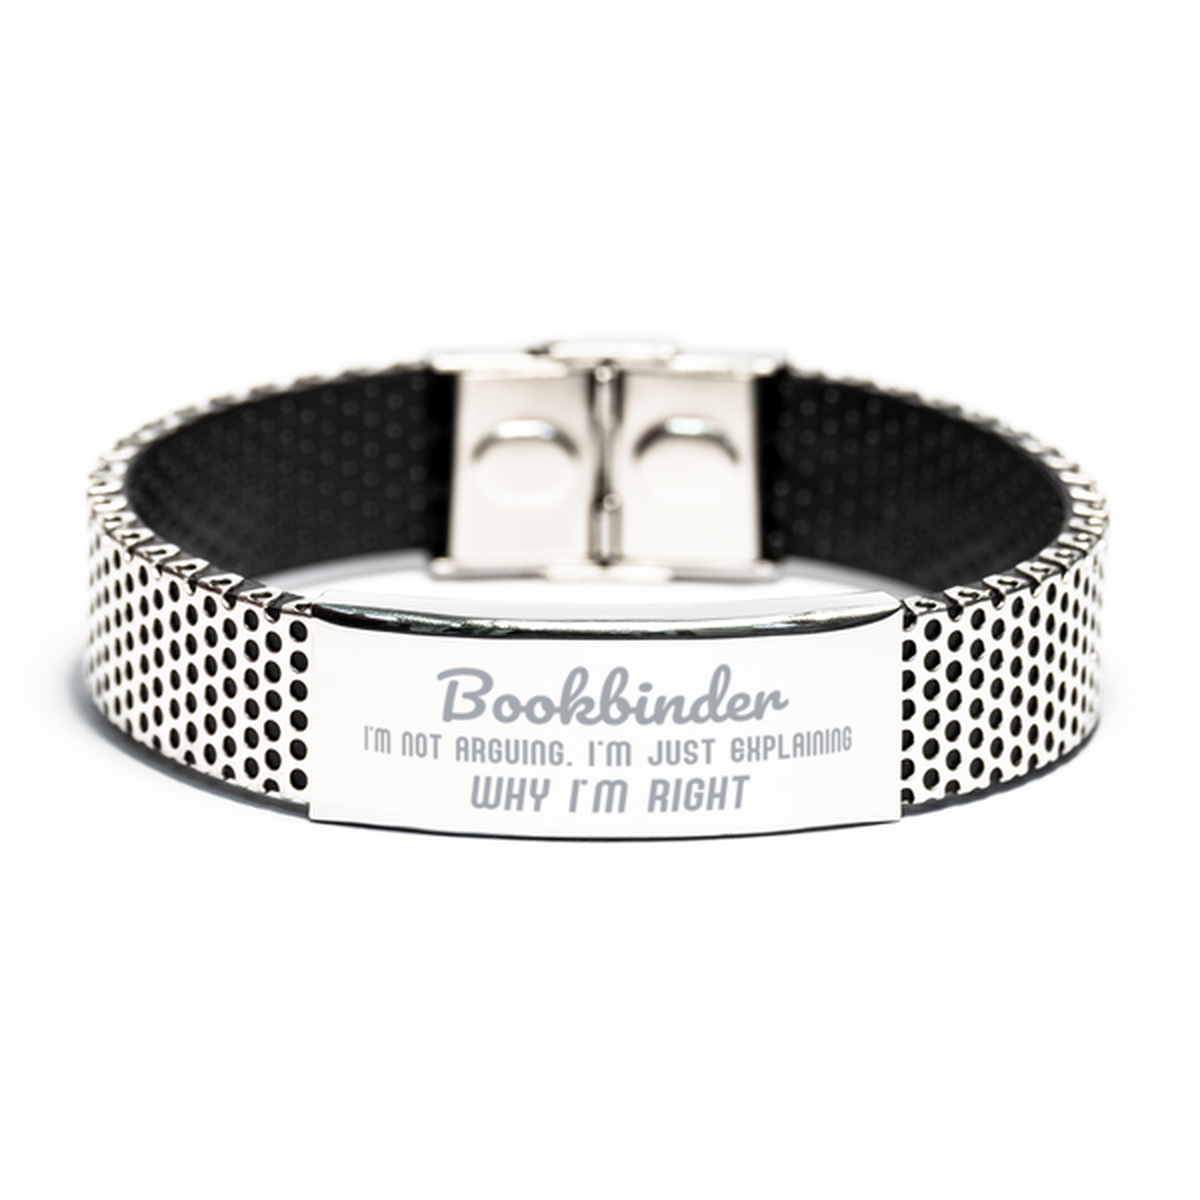 Bookbinder I'm not Arguing. I'm Just Explaining Why I'm RIGHT Stainless Steel Bracelet, Funny Saying Quote Bookbinder Gifts For Bookbinder Graduation Birthday Christmas Gifts for Men Women Coworker